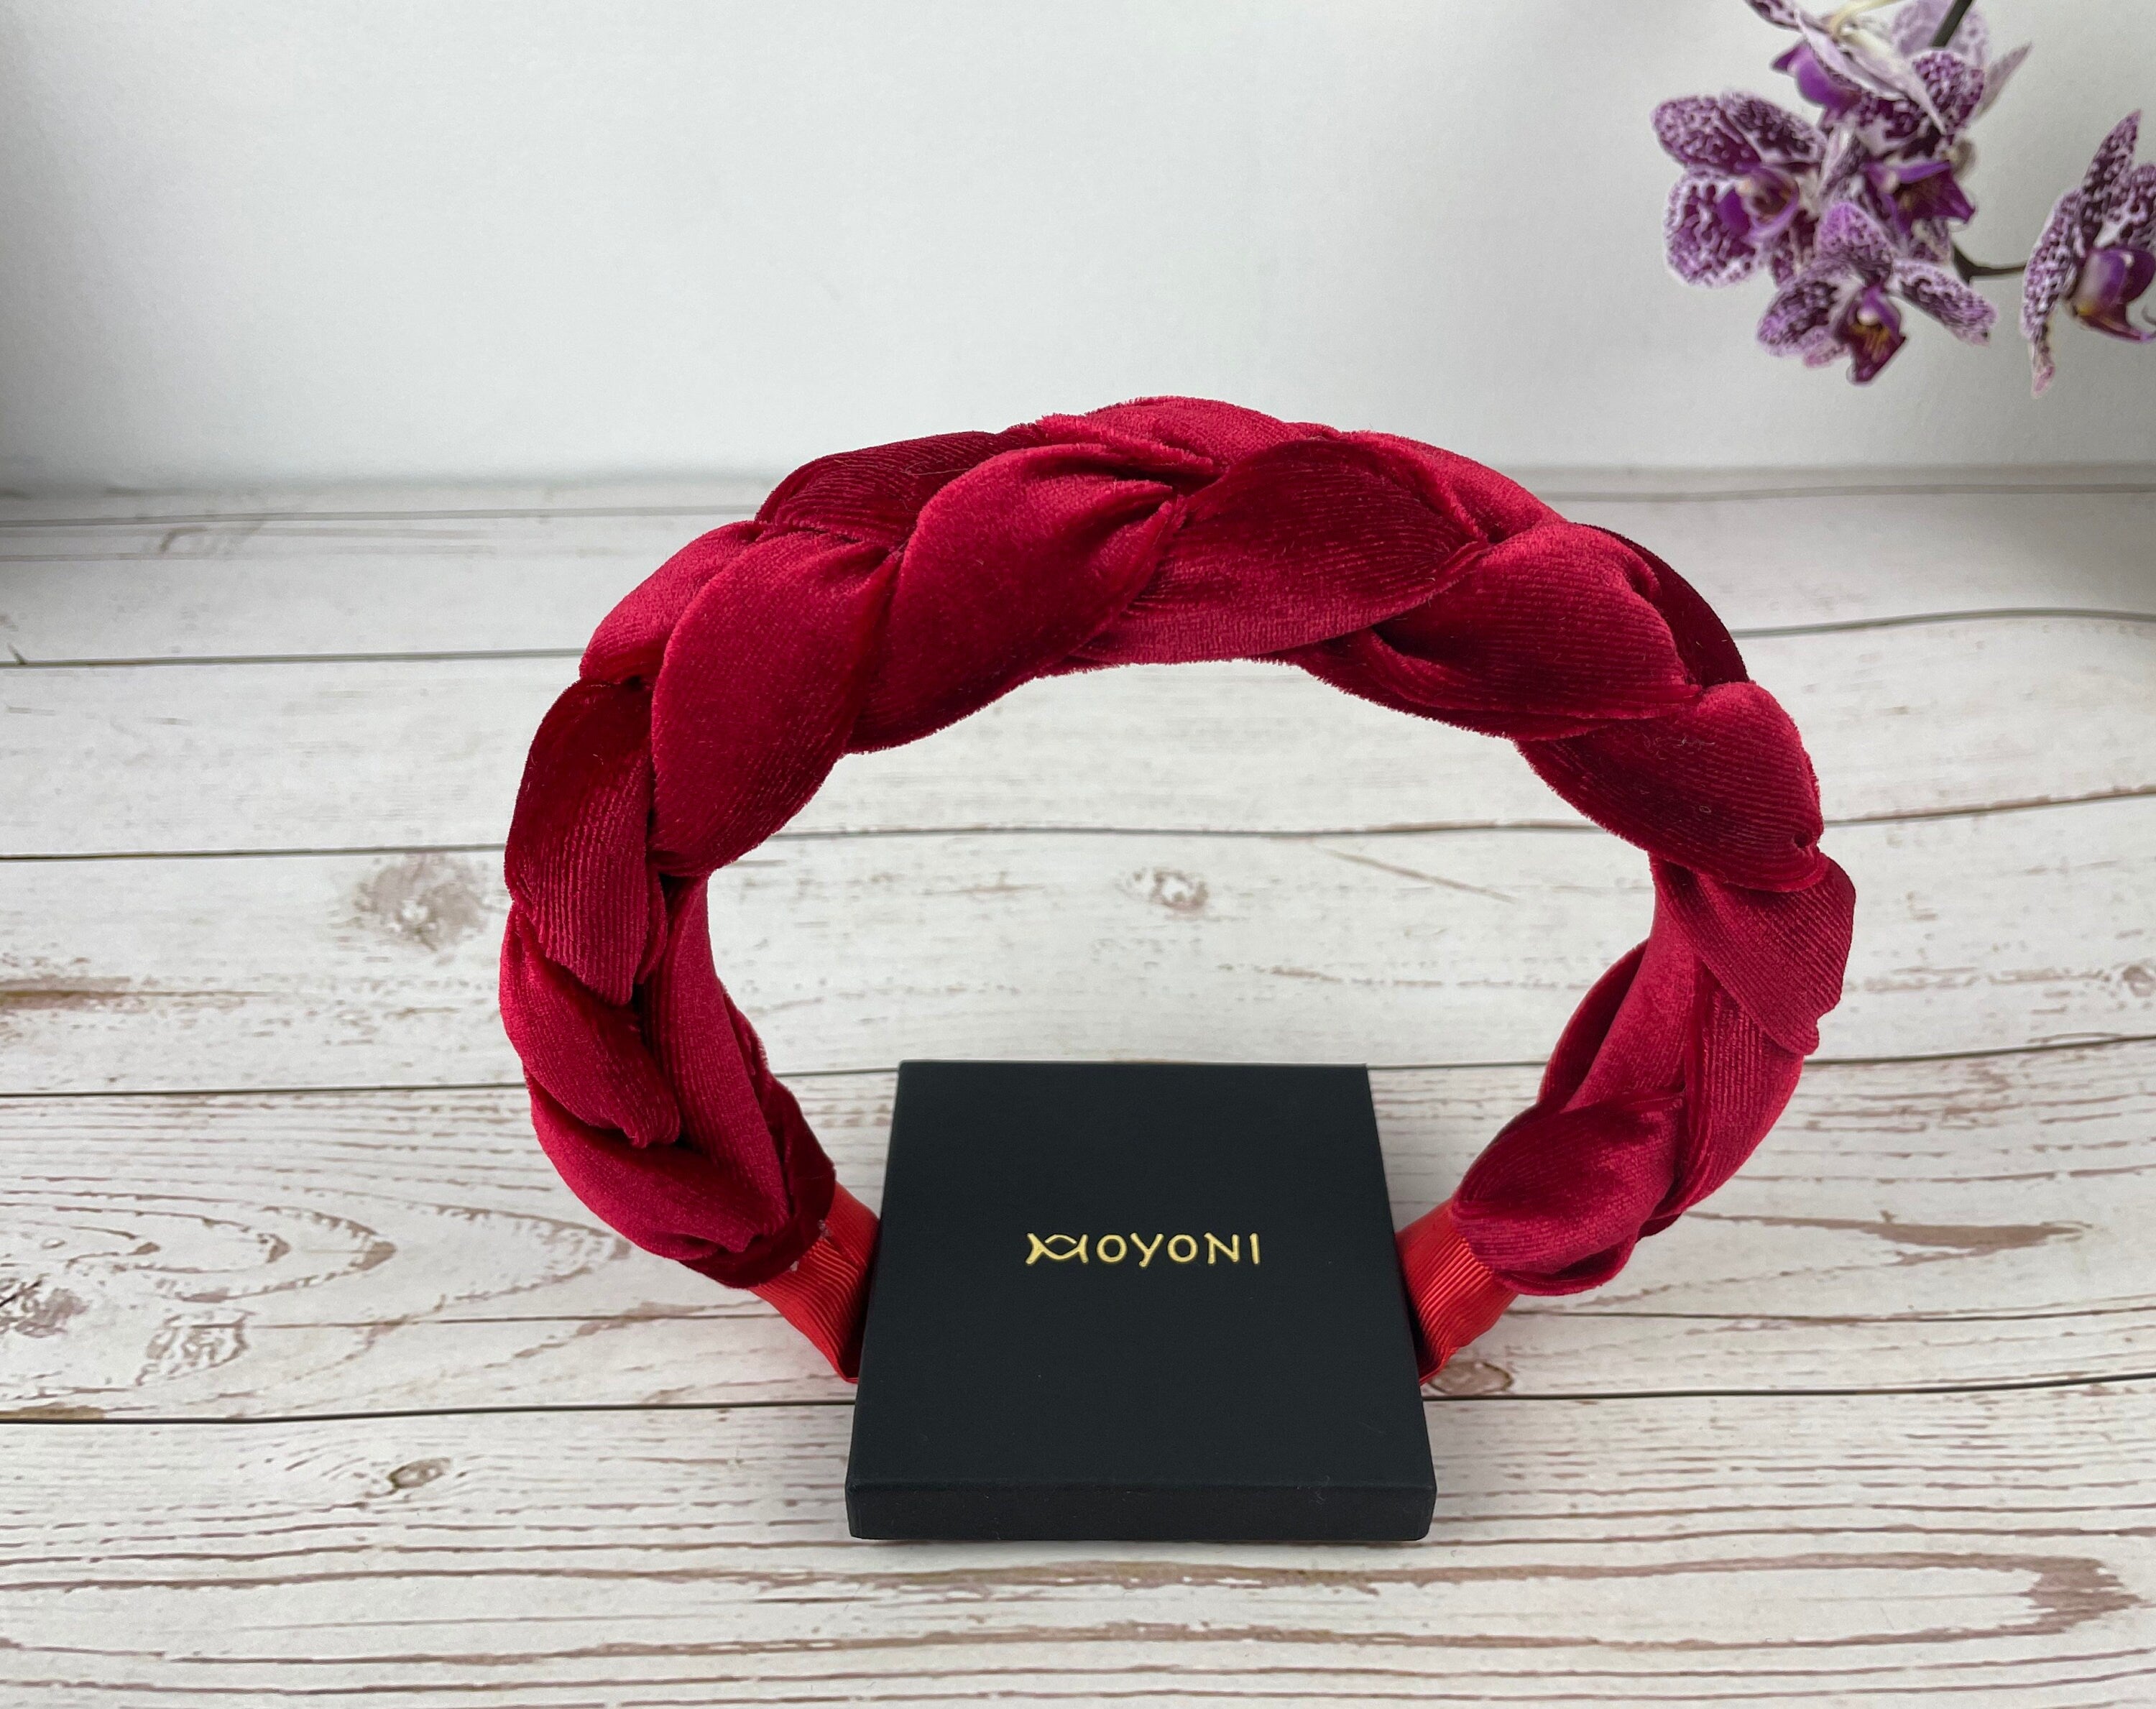 Complete your look with our Red Velvet Braided Headband! This chic accessory is perfect for any occasion and makes a great gift for the fashion-savvy woman. Shop now on Etsy.